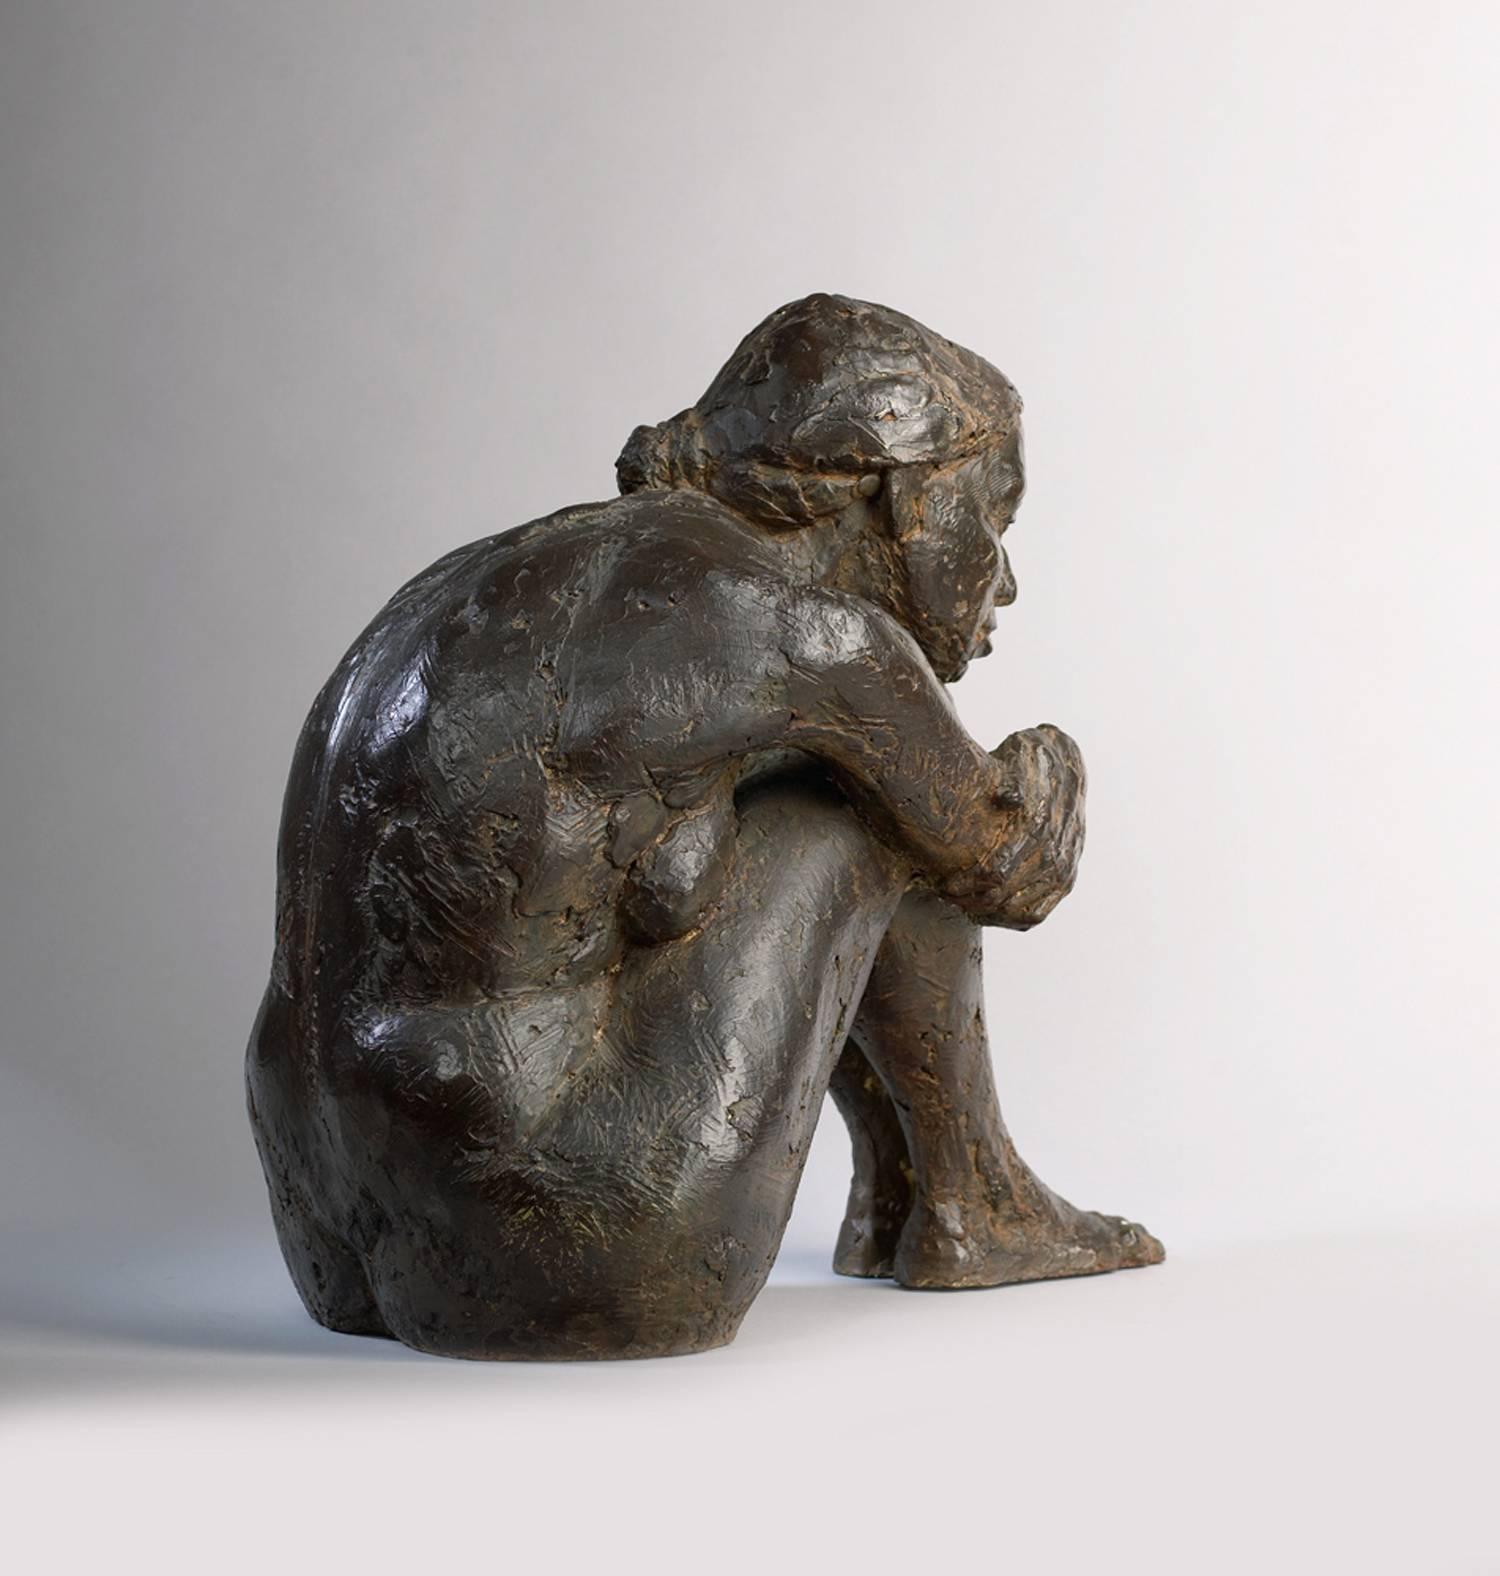 Seated Figure - Realist Sculpture by Peter Brooke